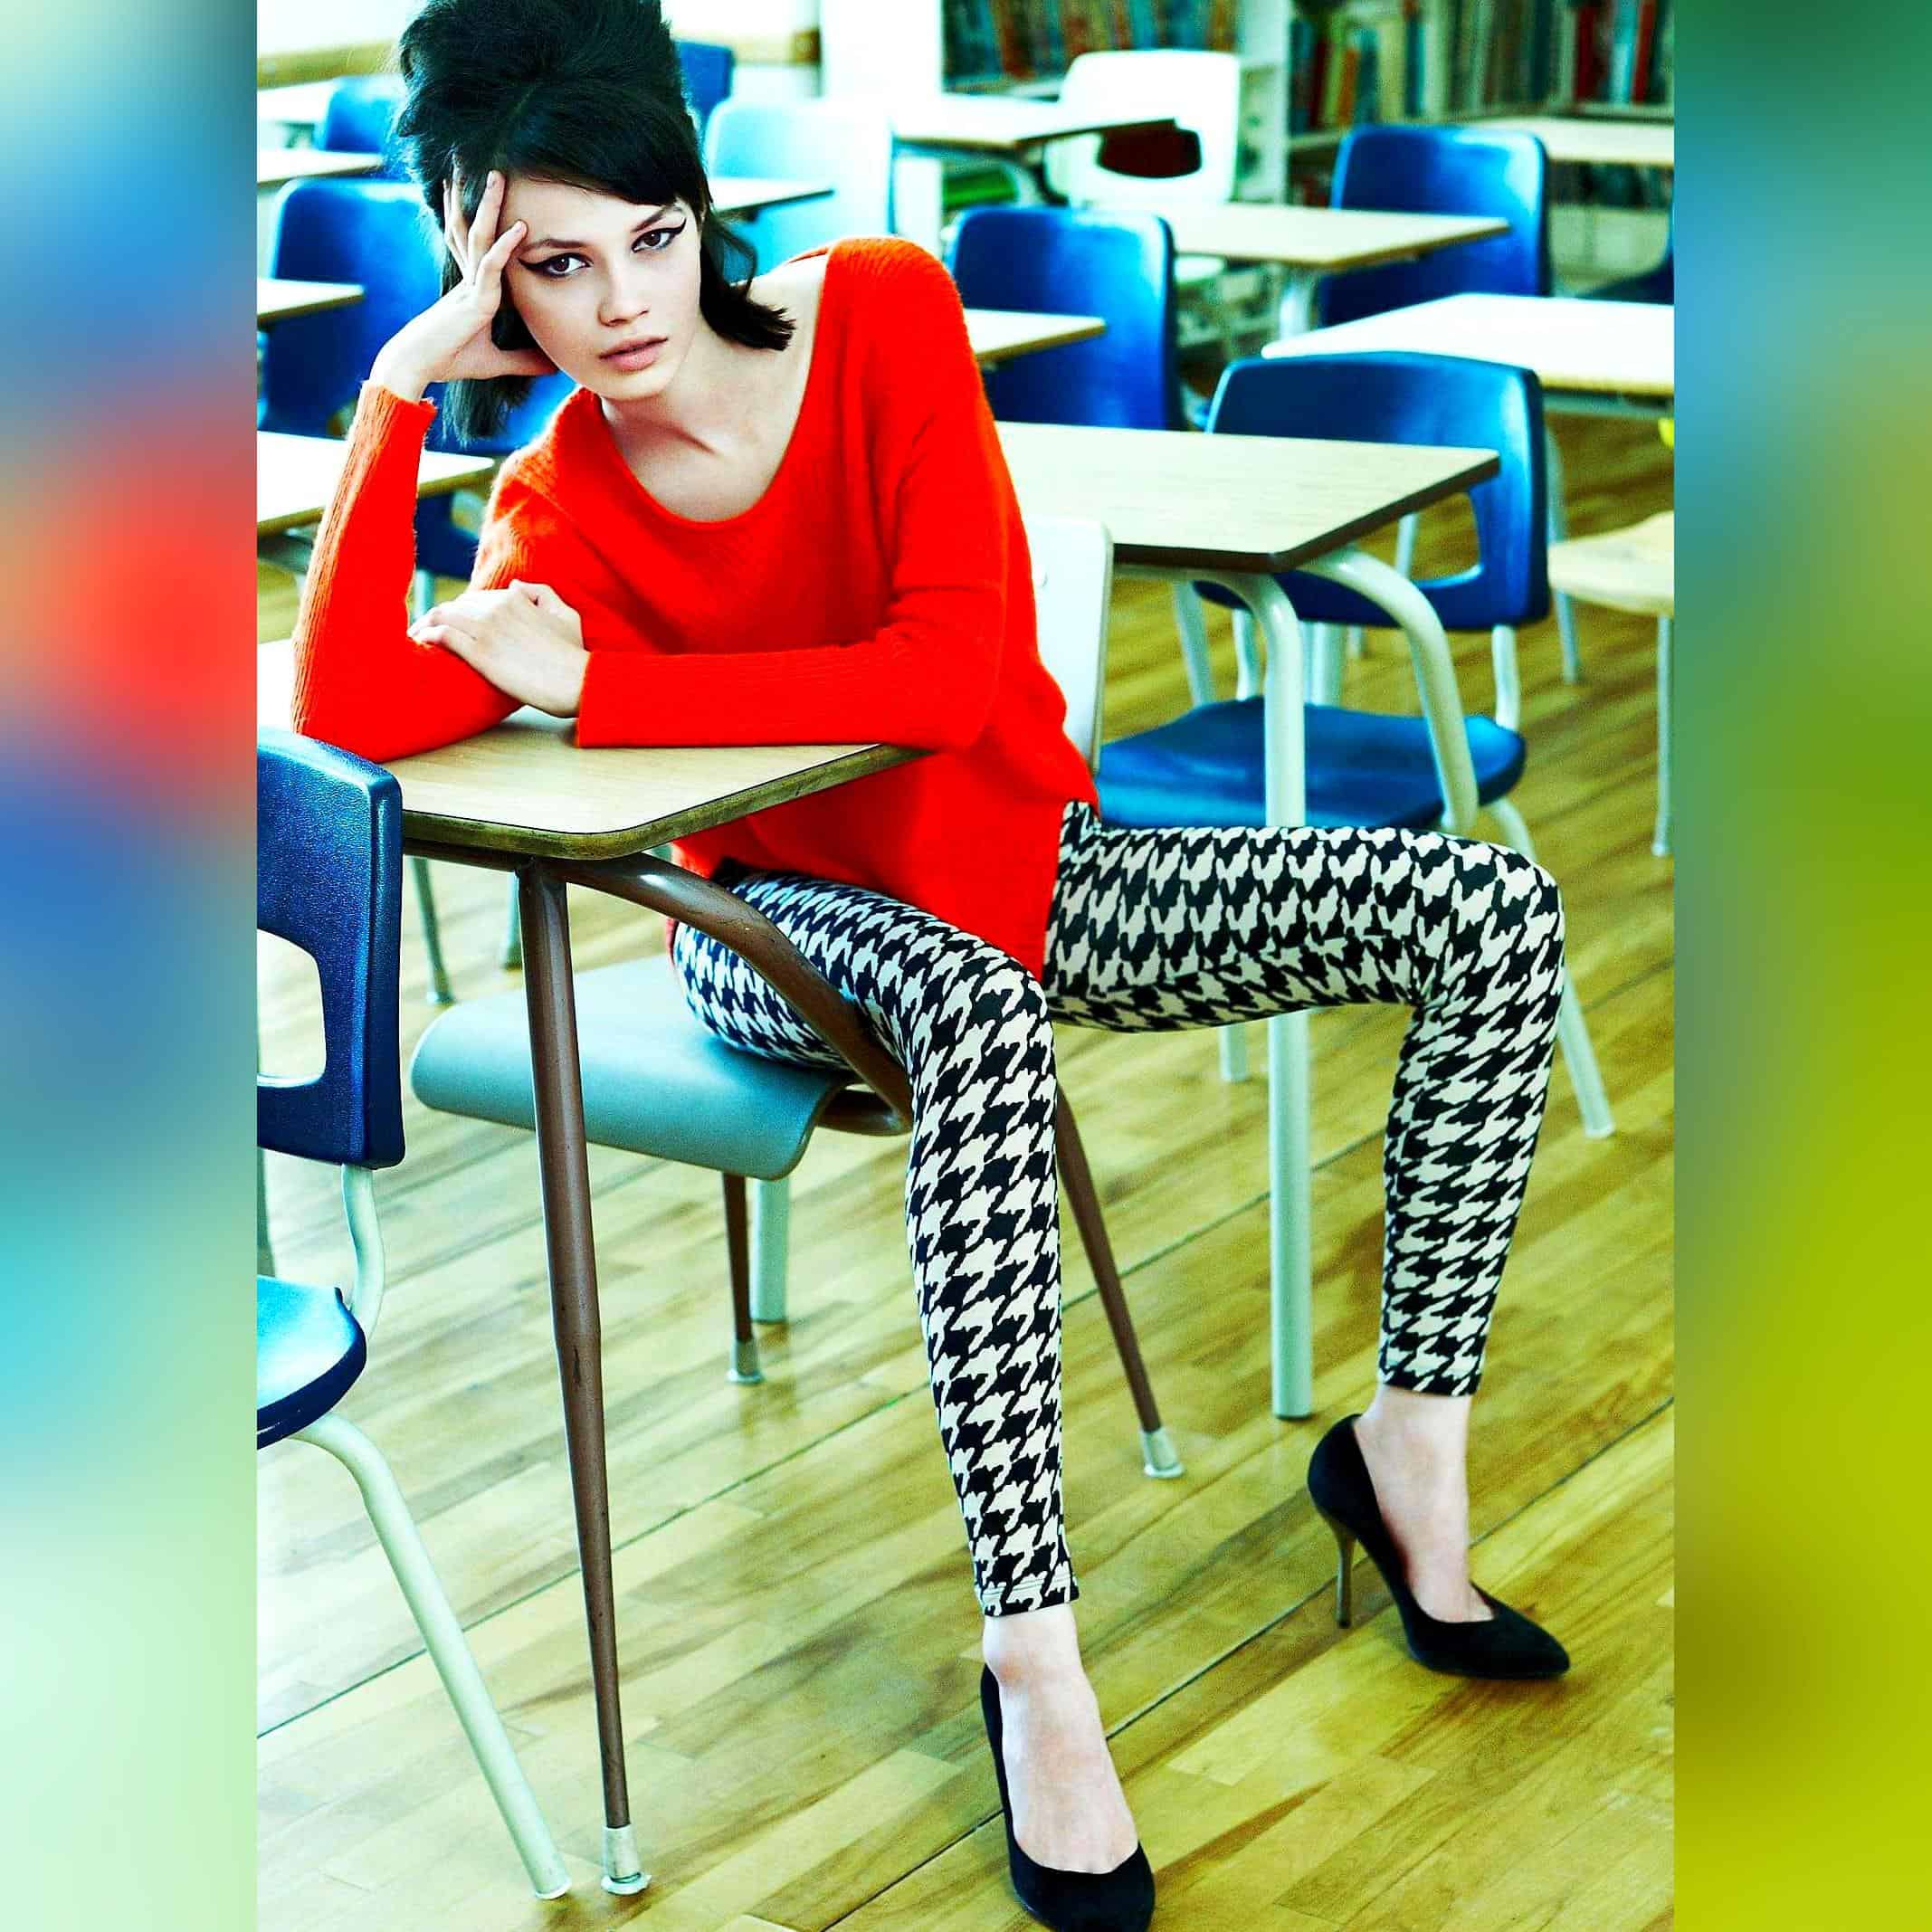 Are Houndstooth Pants In Style 2023